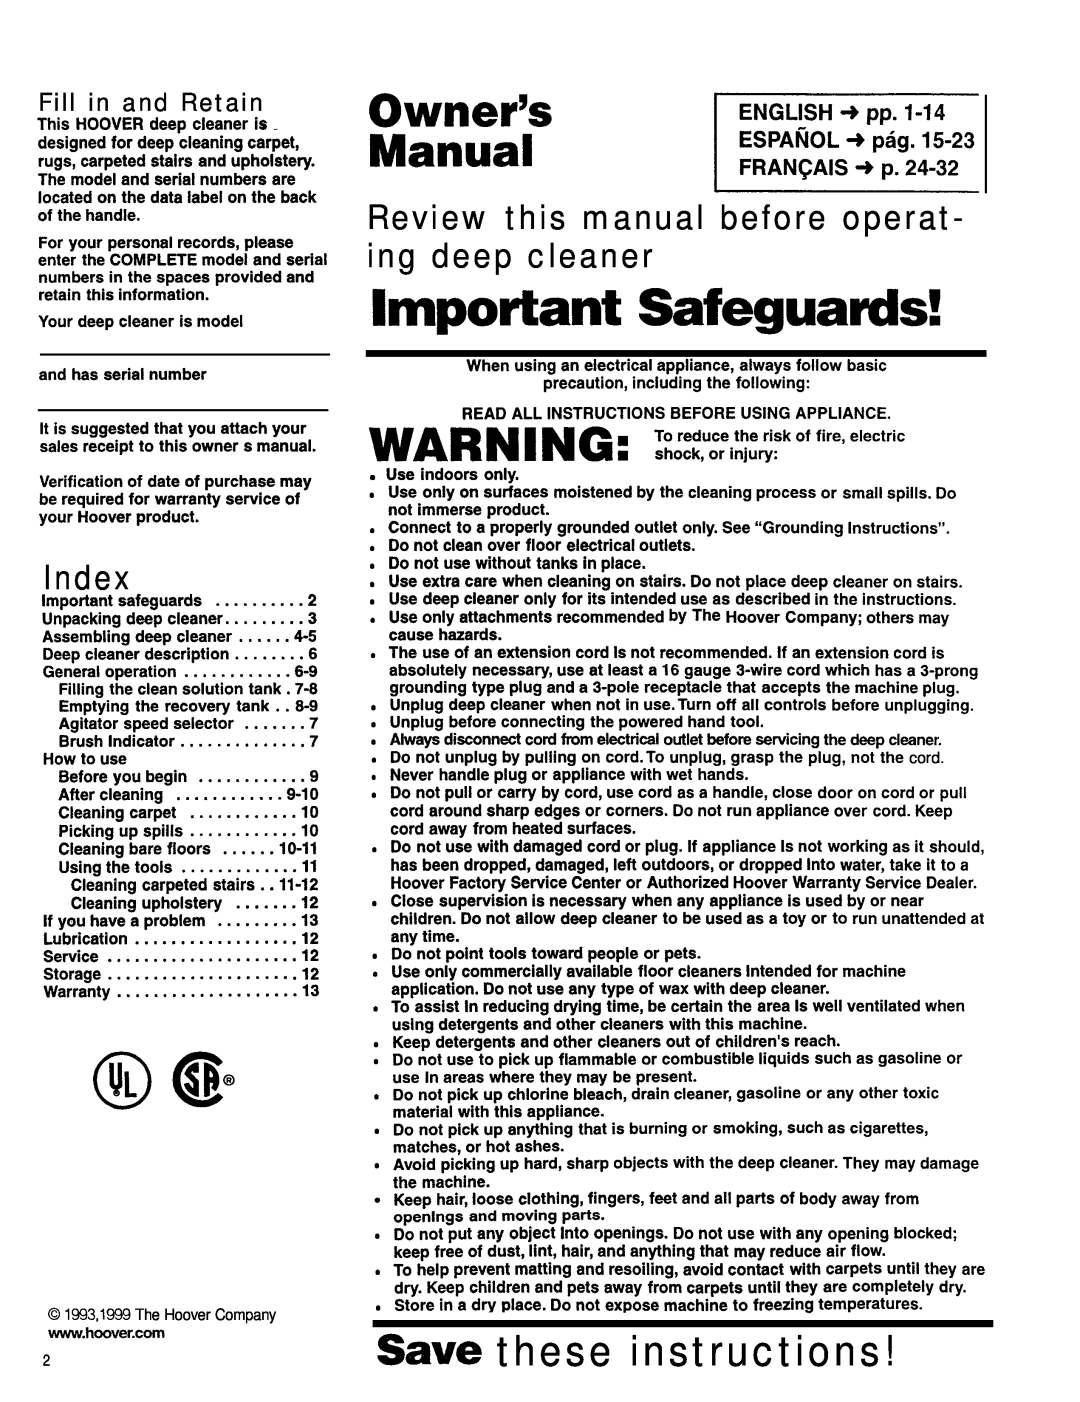 Hoover SteamVac" LS Sawe these instructions, Index, Review this manual before operat- ing deep cleaner, Fill in and Retain 